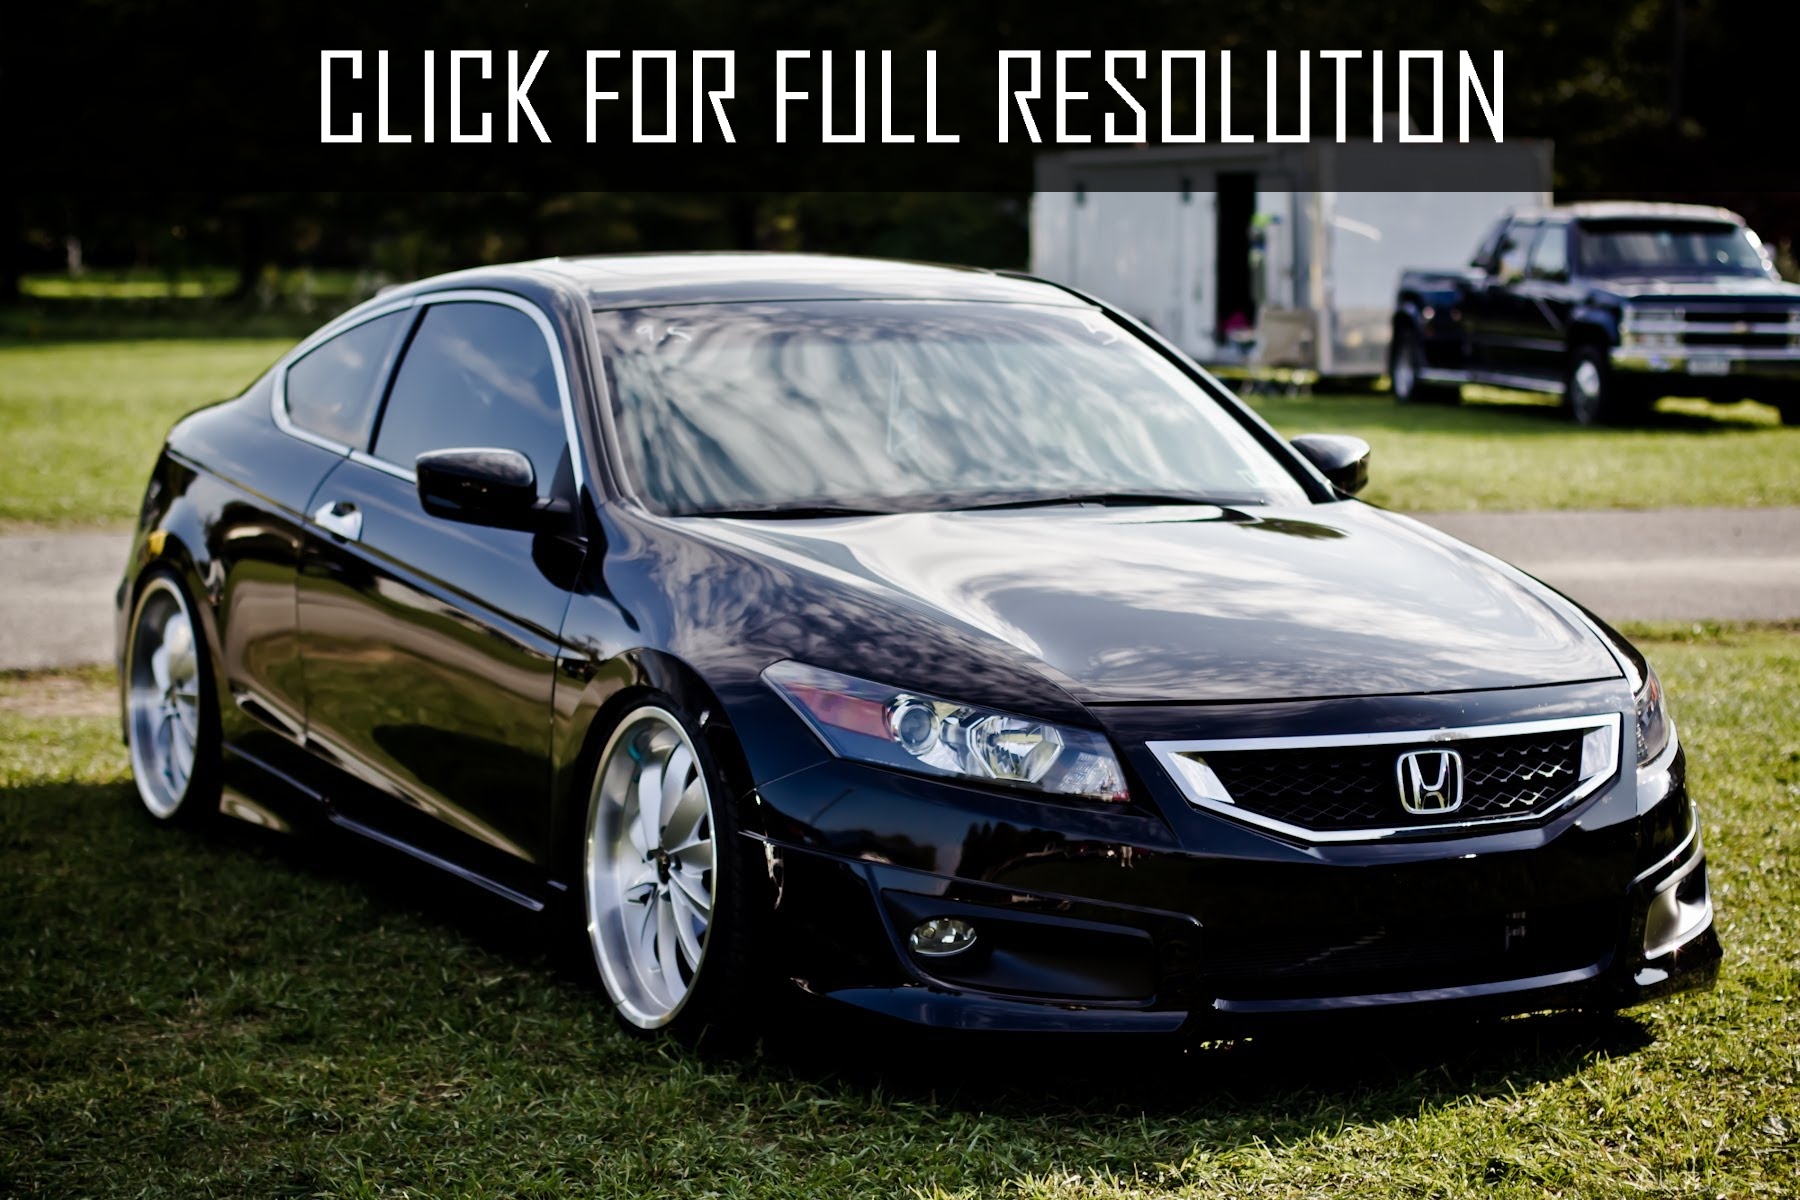 Honda Accord 8th Gen - amazing photo gallery, some information and